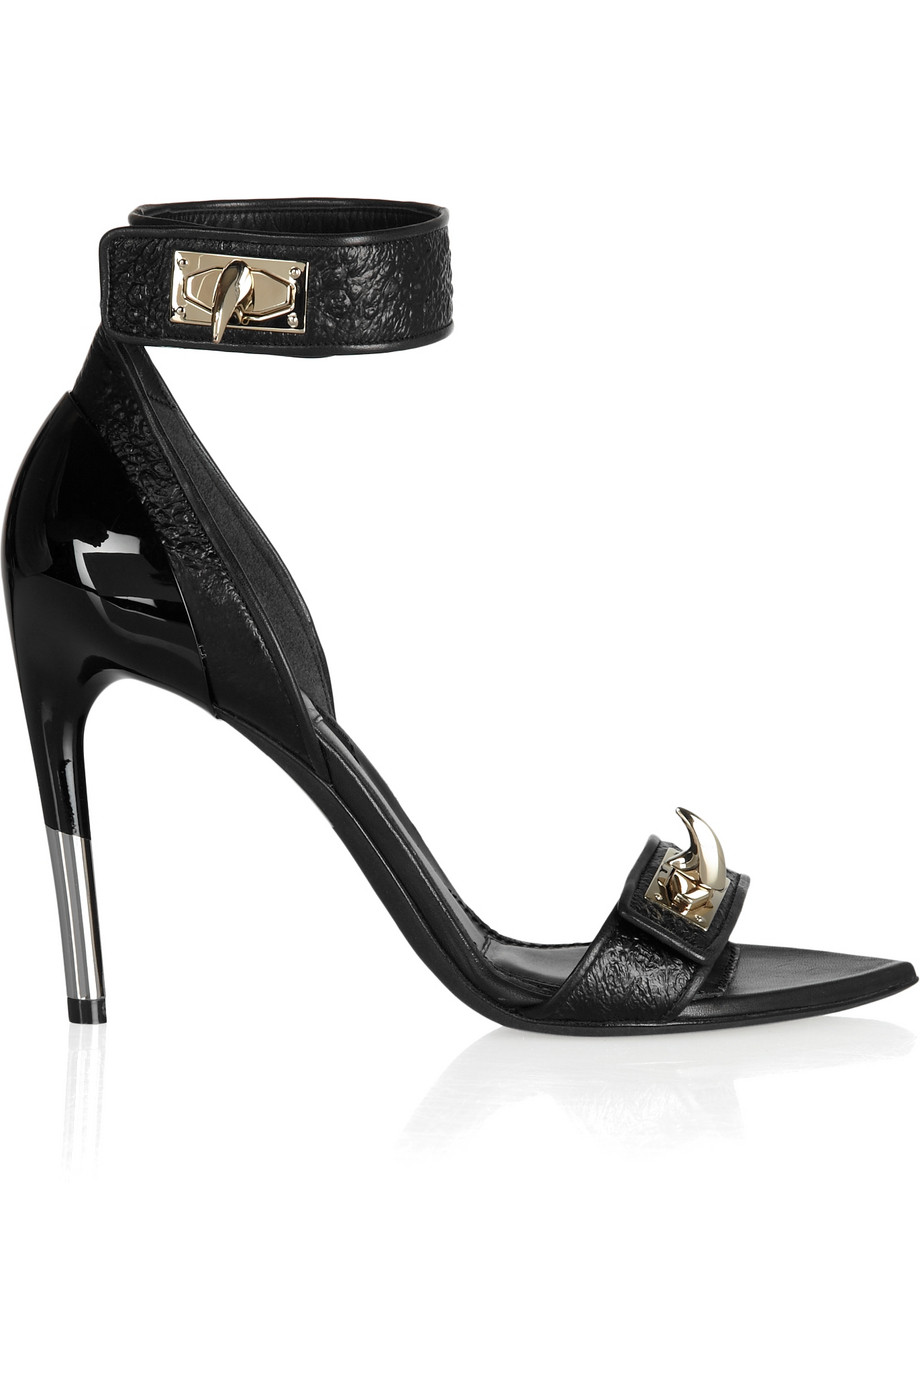 Givenchy Embellished Hagfish Sandals in Black - Lyst